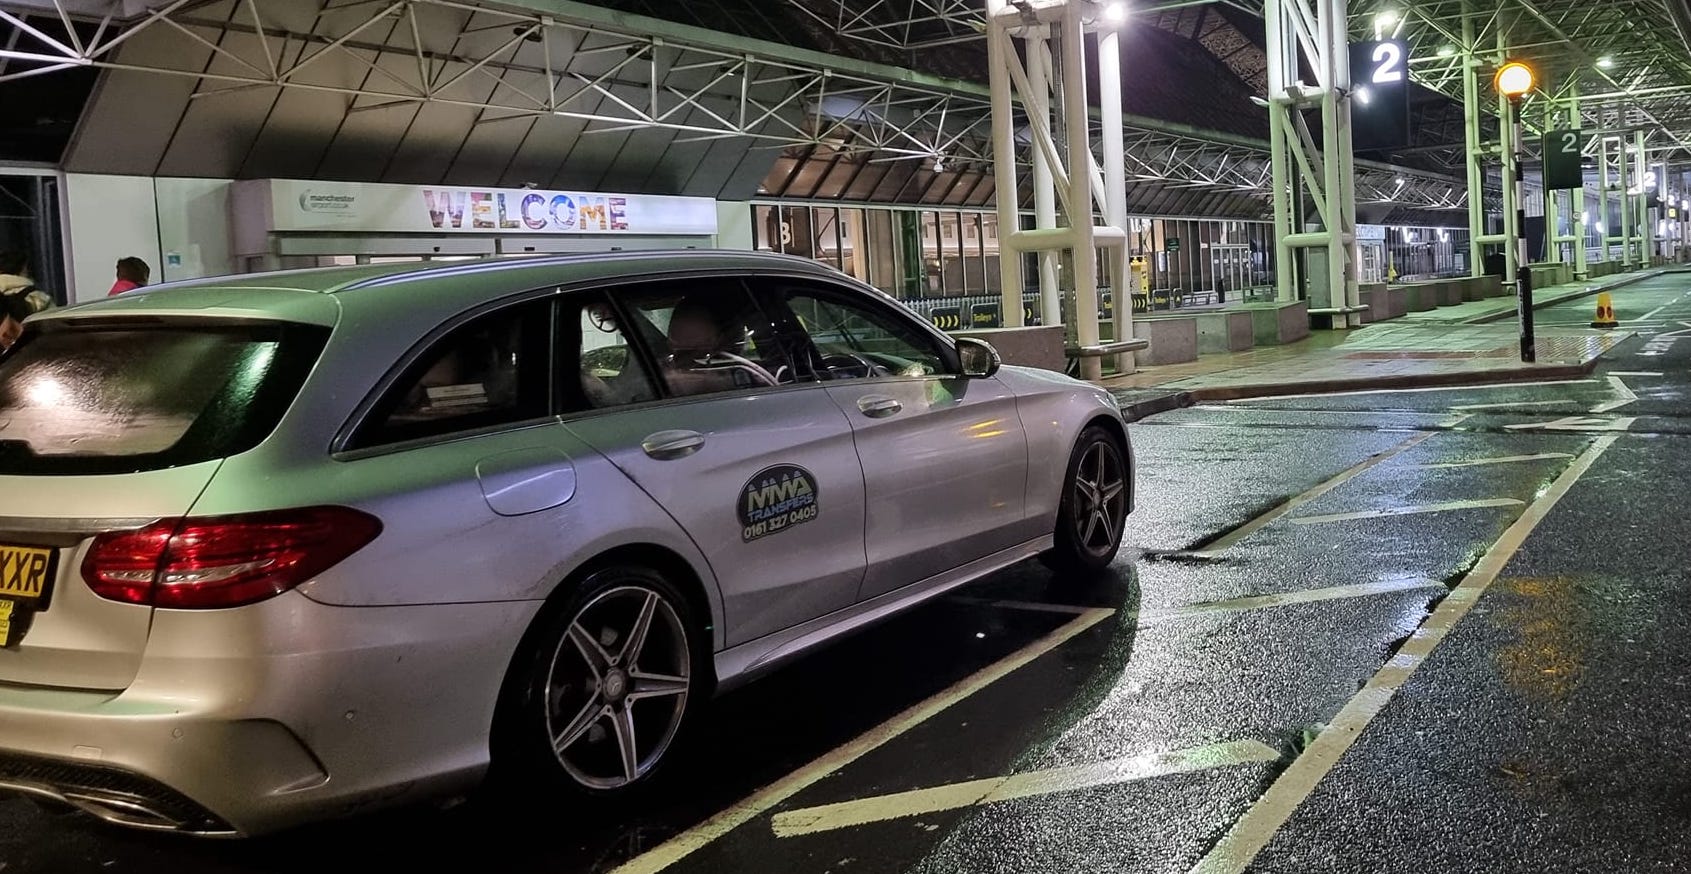 Take a Taxi from Manchester Airport to Congleton with a free Meet and Greet Service